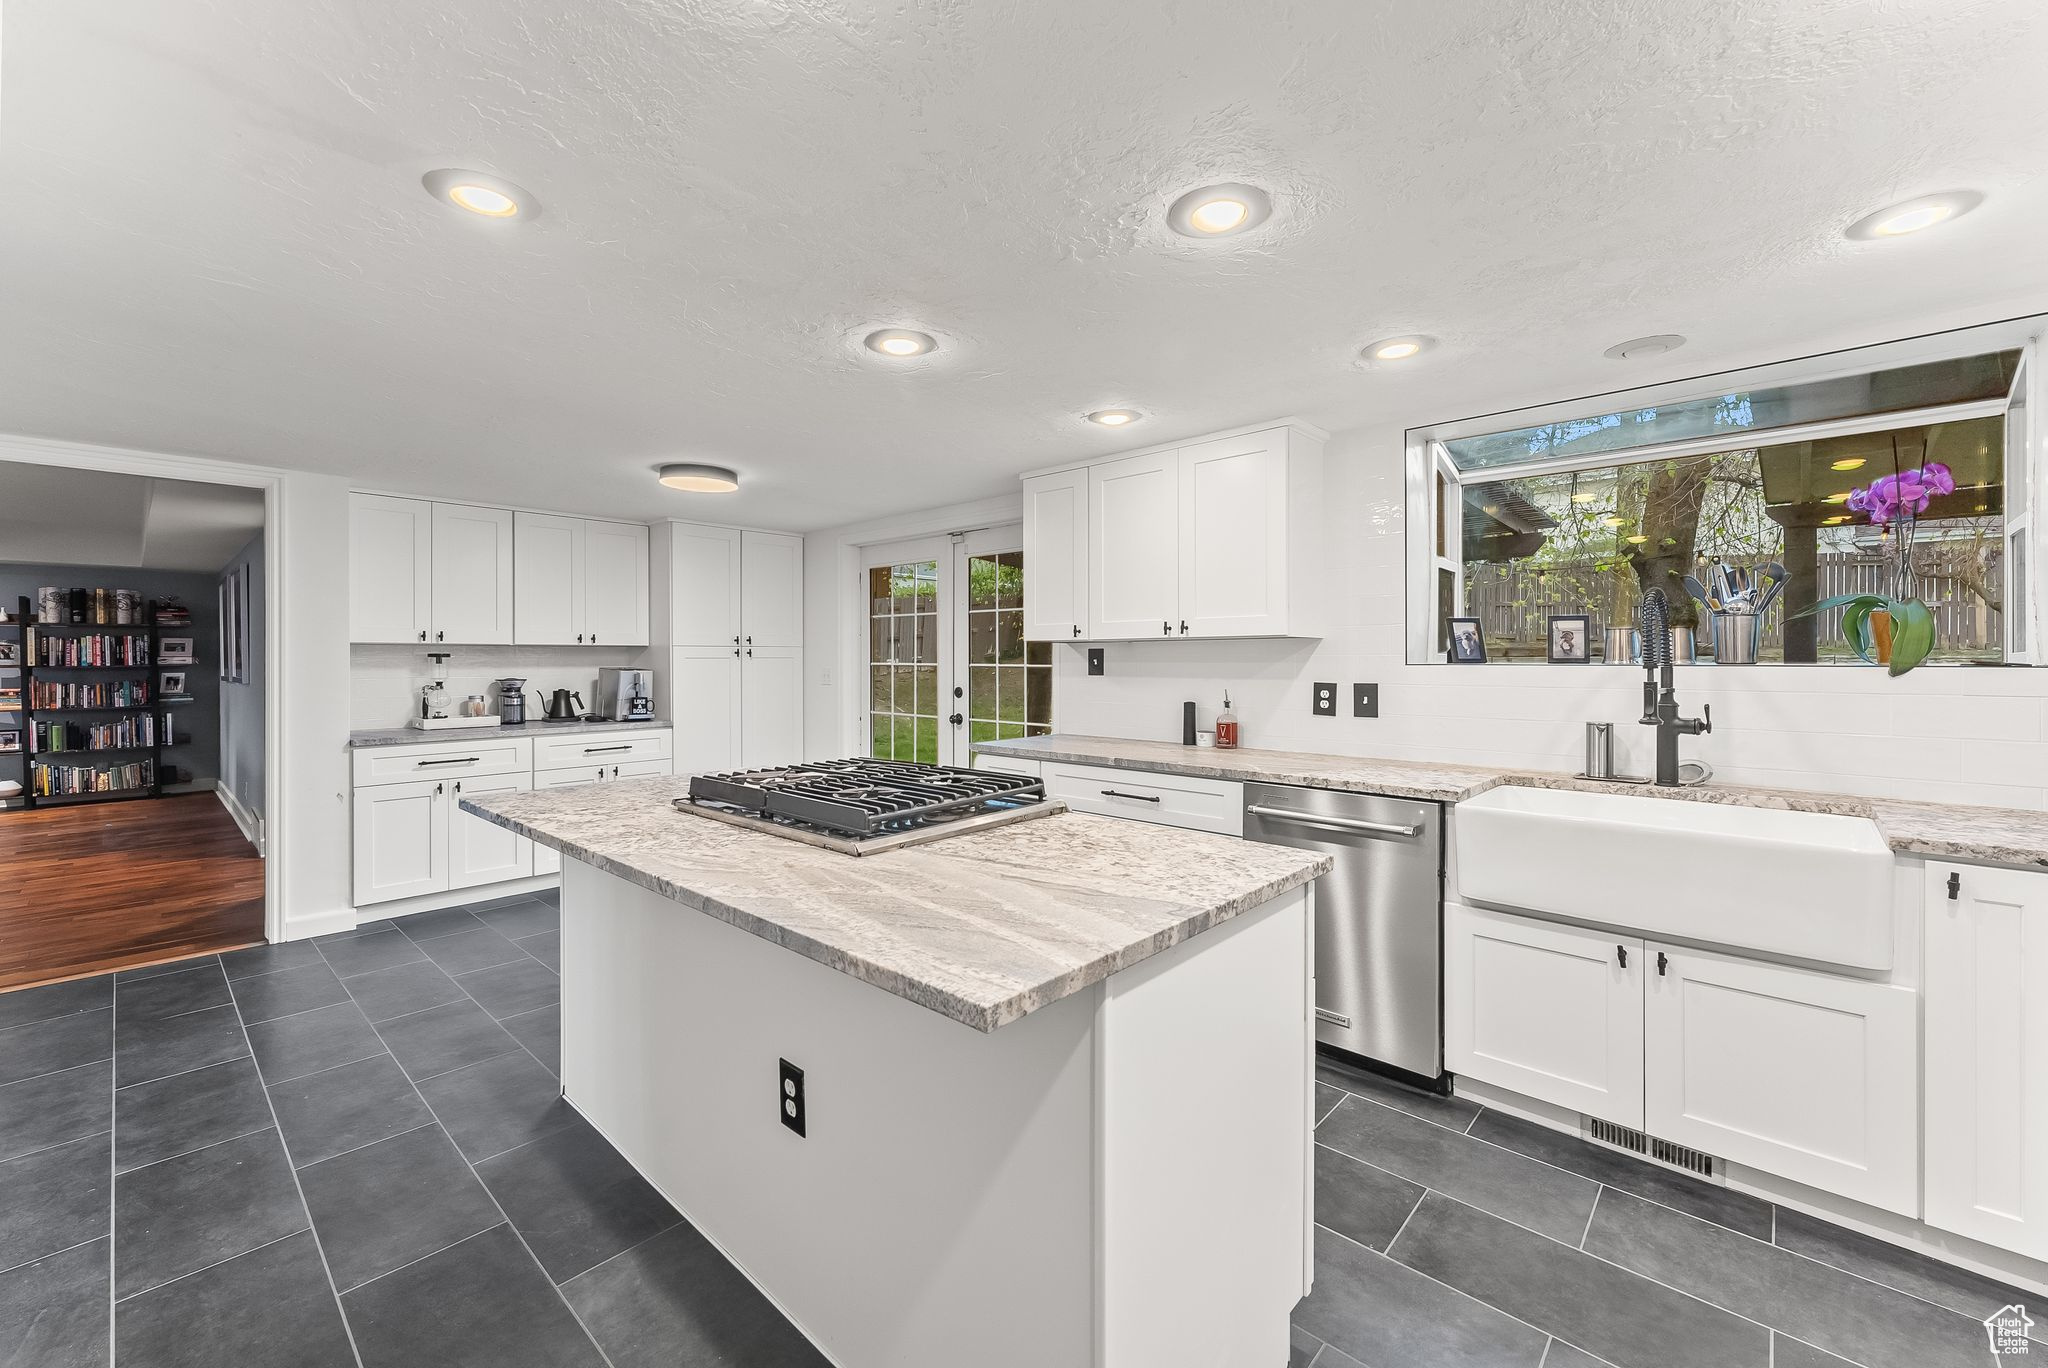 Kitchen featuring white cabinets, sink, stainless steel appliances, and dark tile flooring